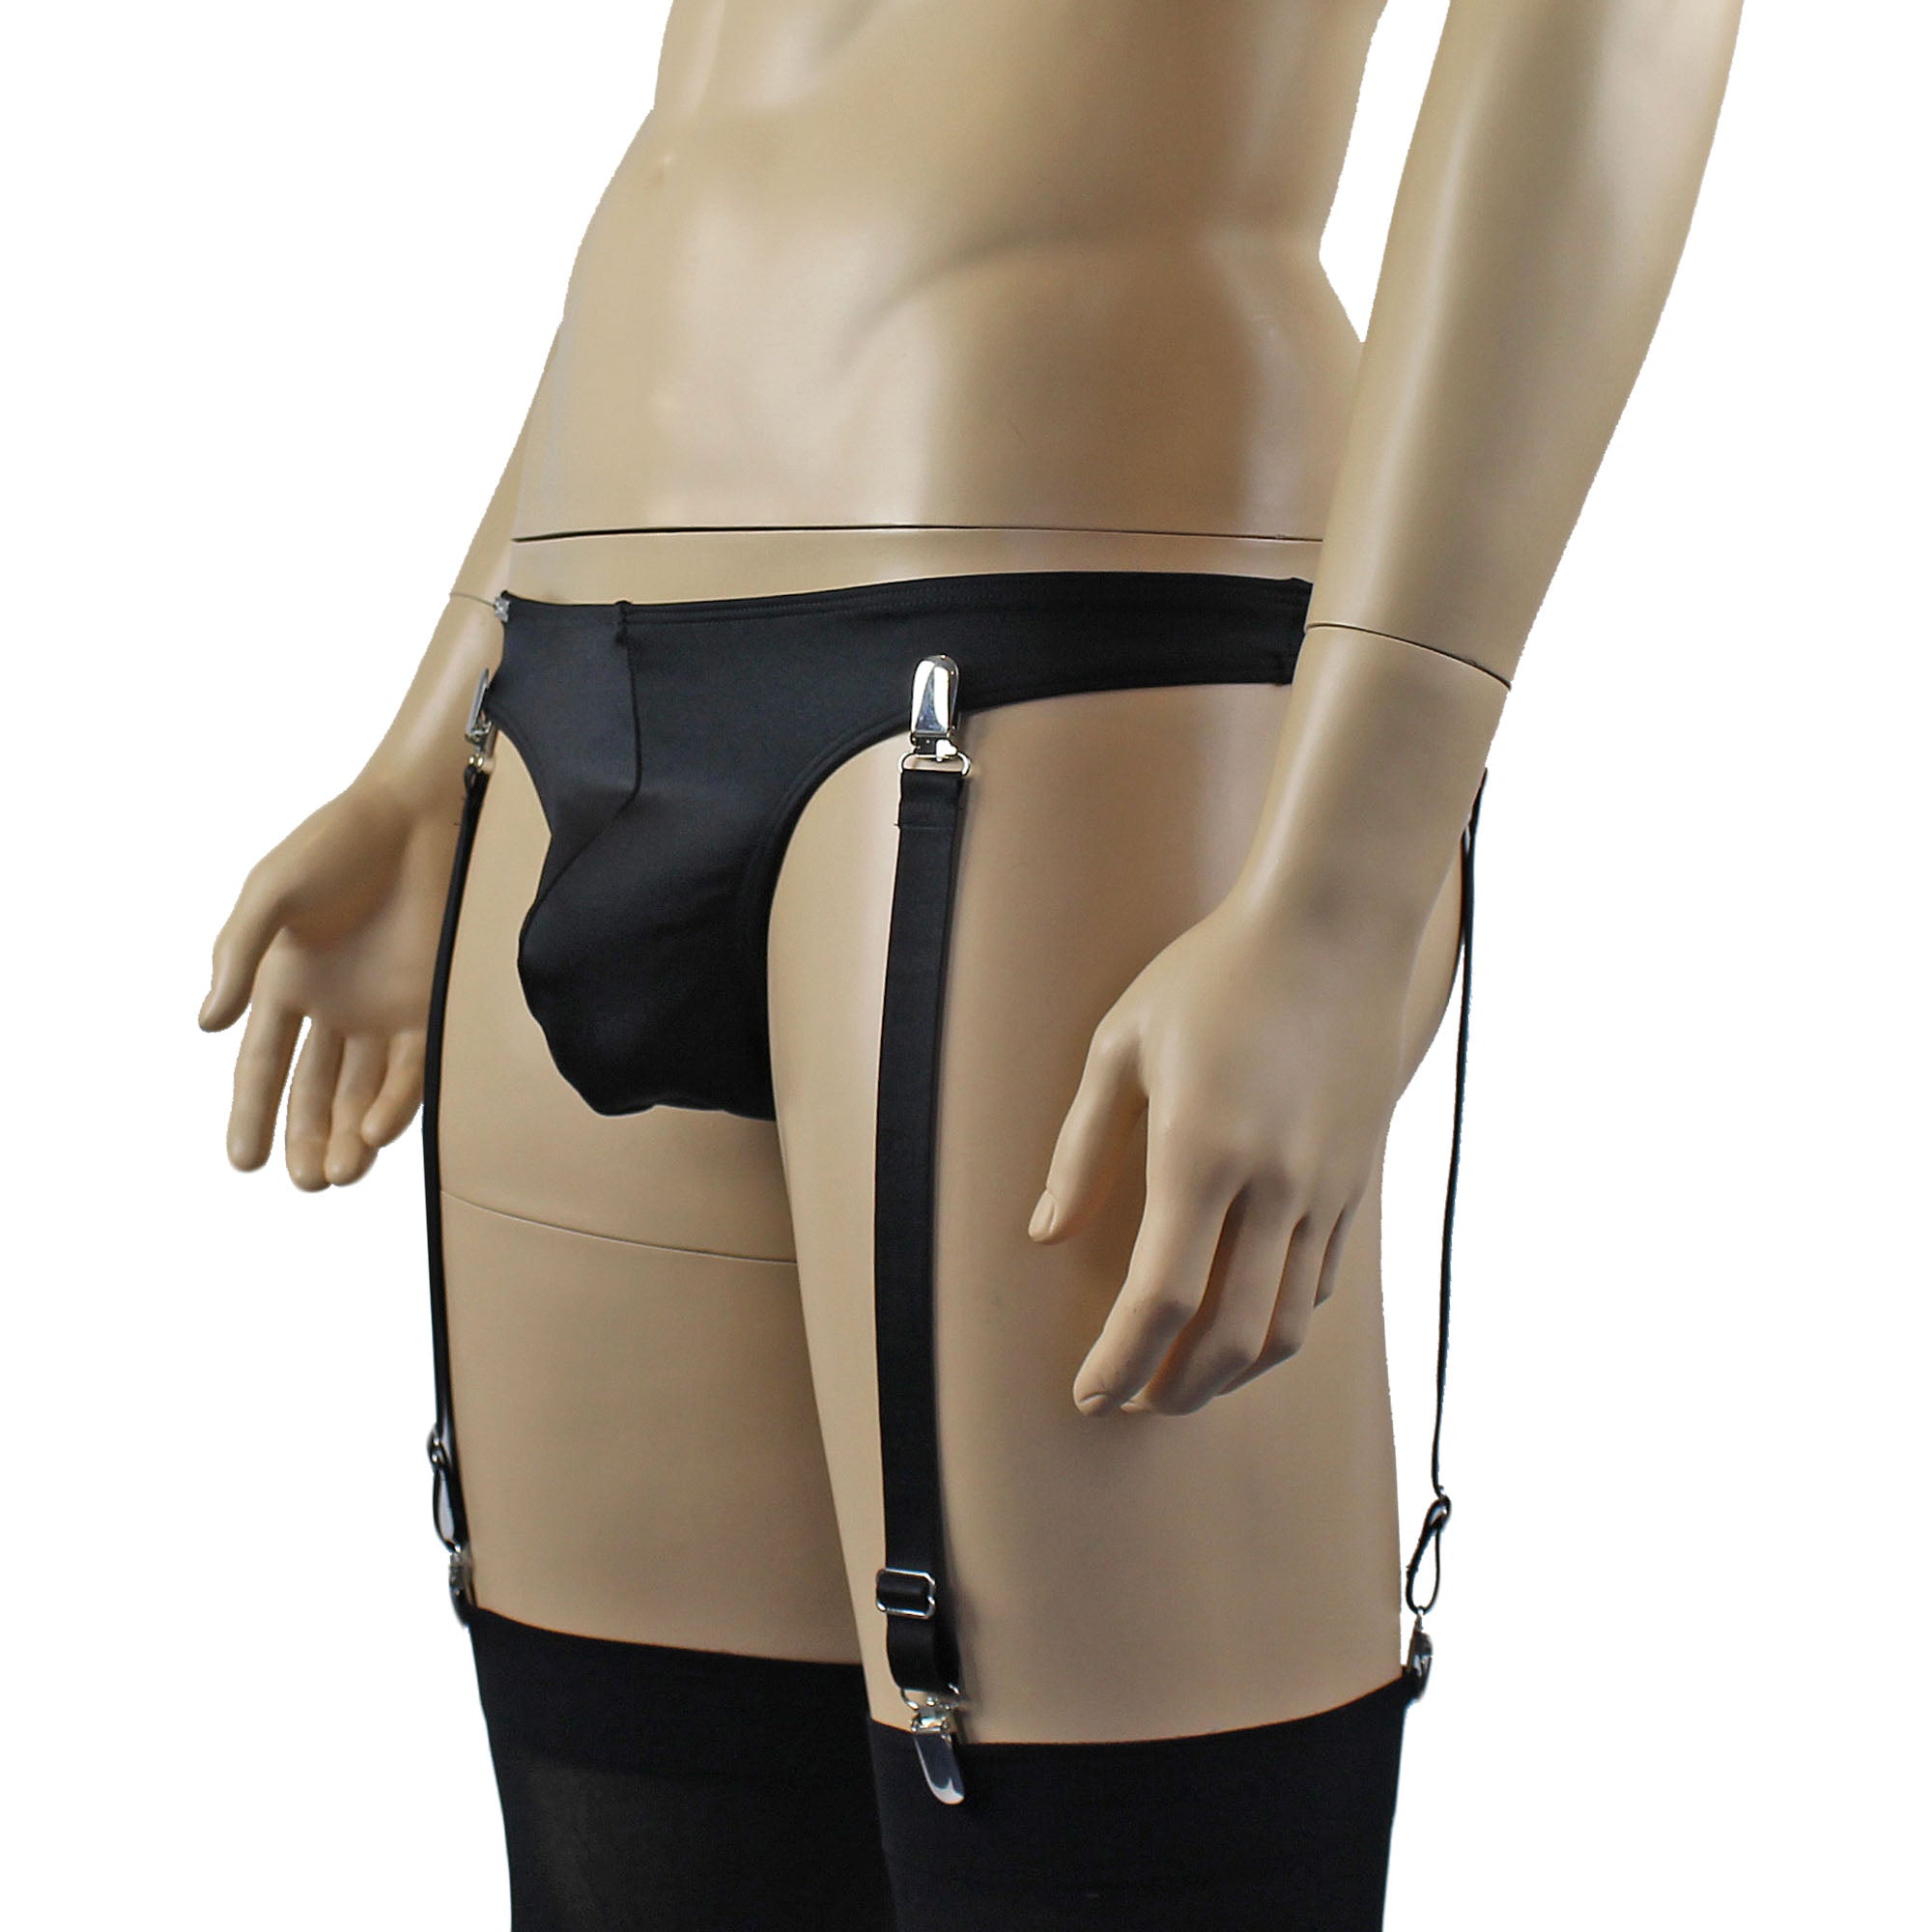 Mens Mick Thong with the Zoe, Detachable Garters & Stockings Black